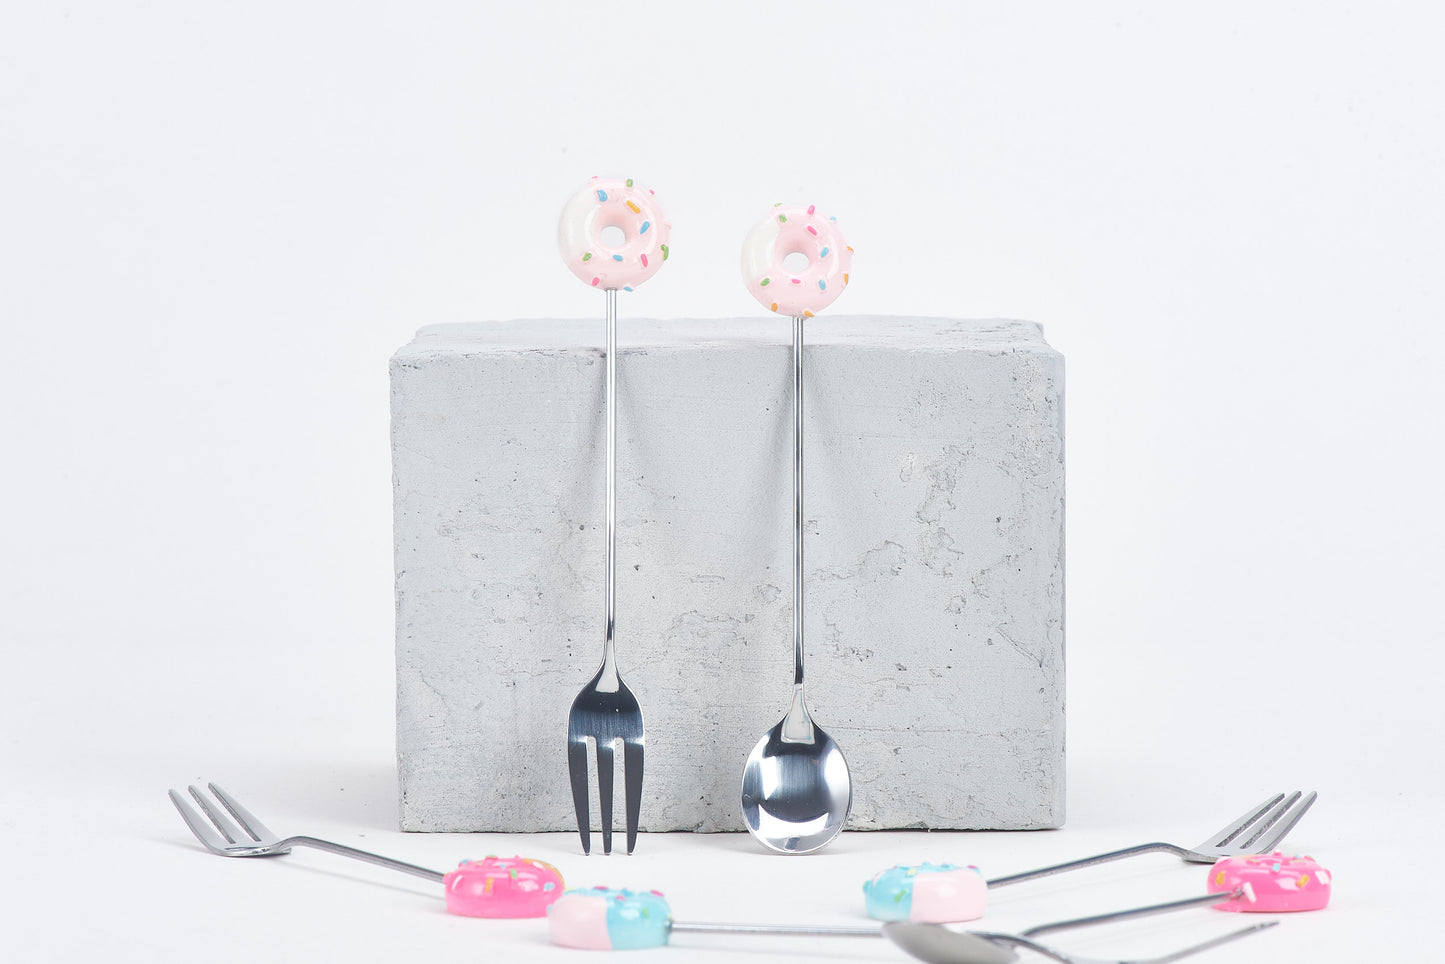 Pink Doughnut Fork & Spoon - Lucid and Real